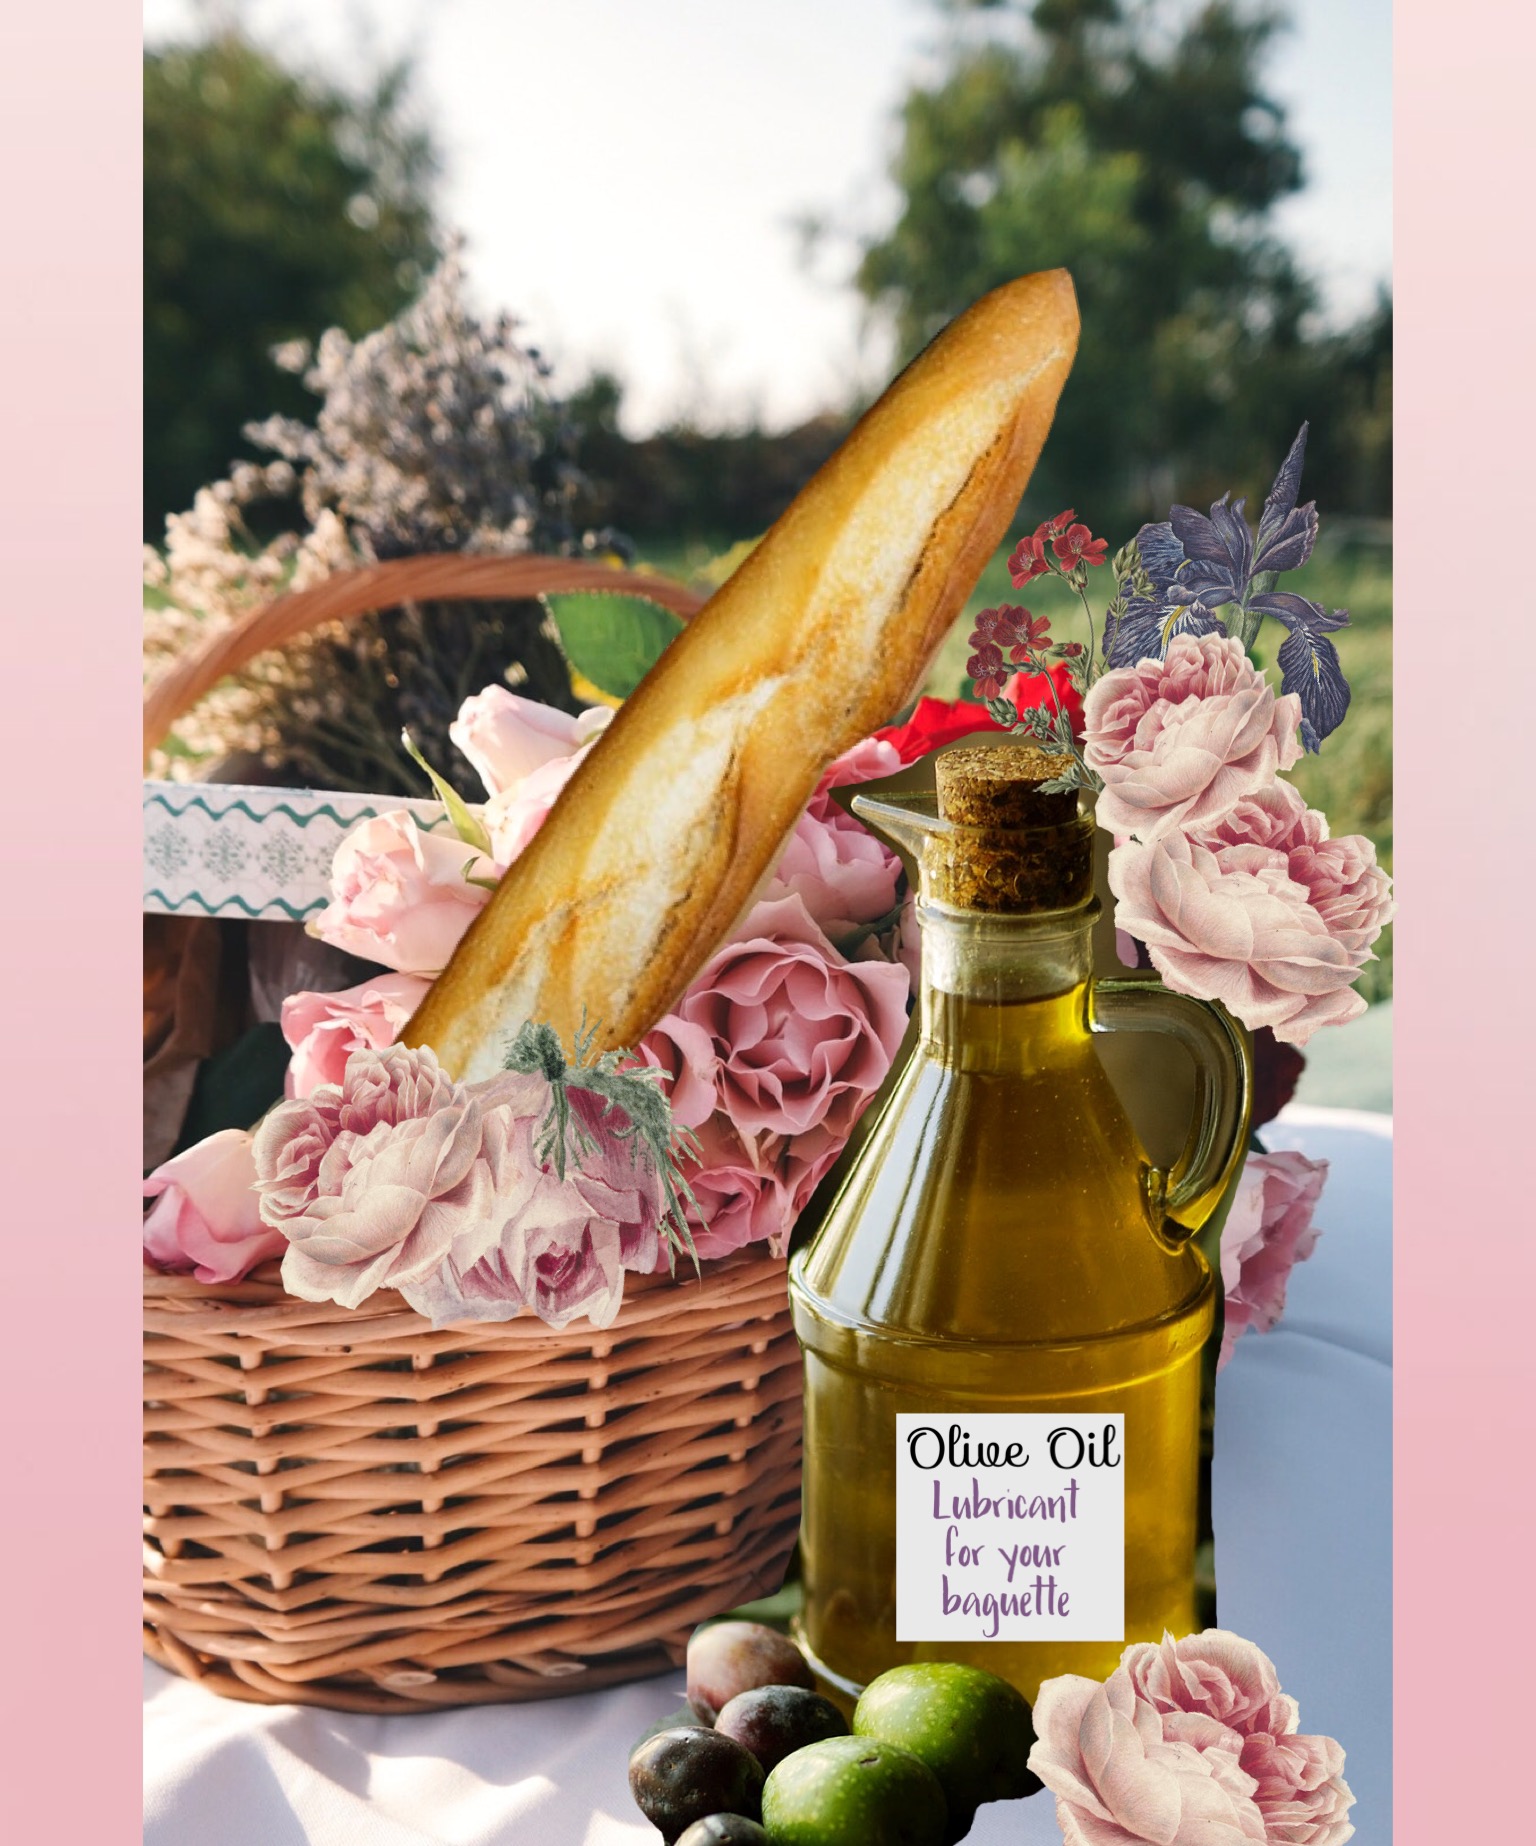 Olive oil and baguette